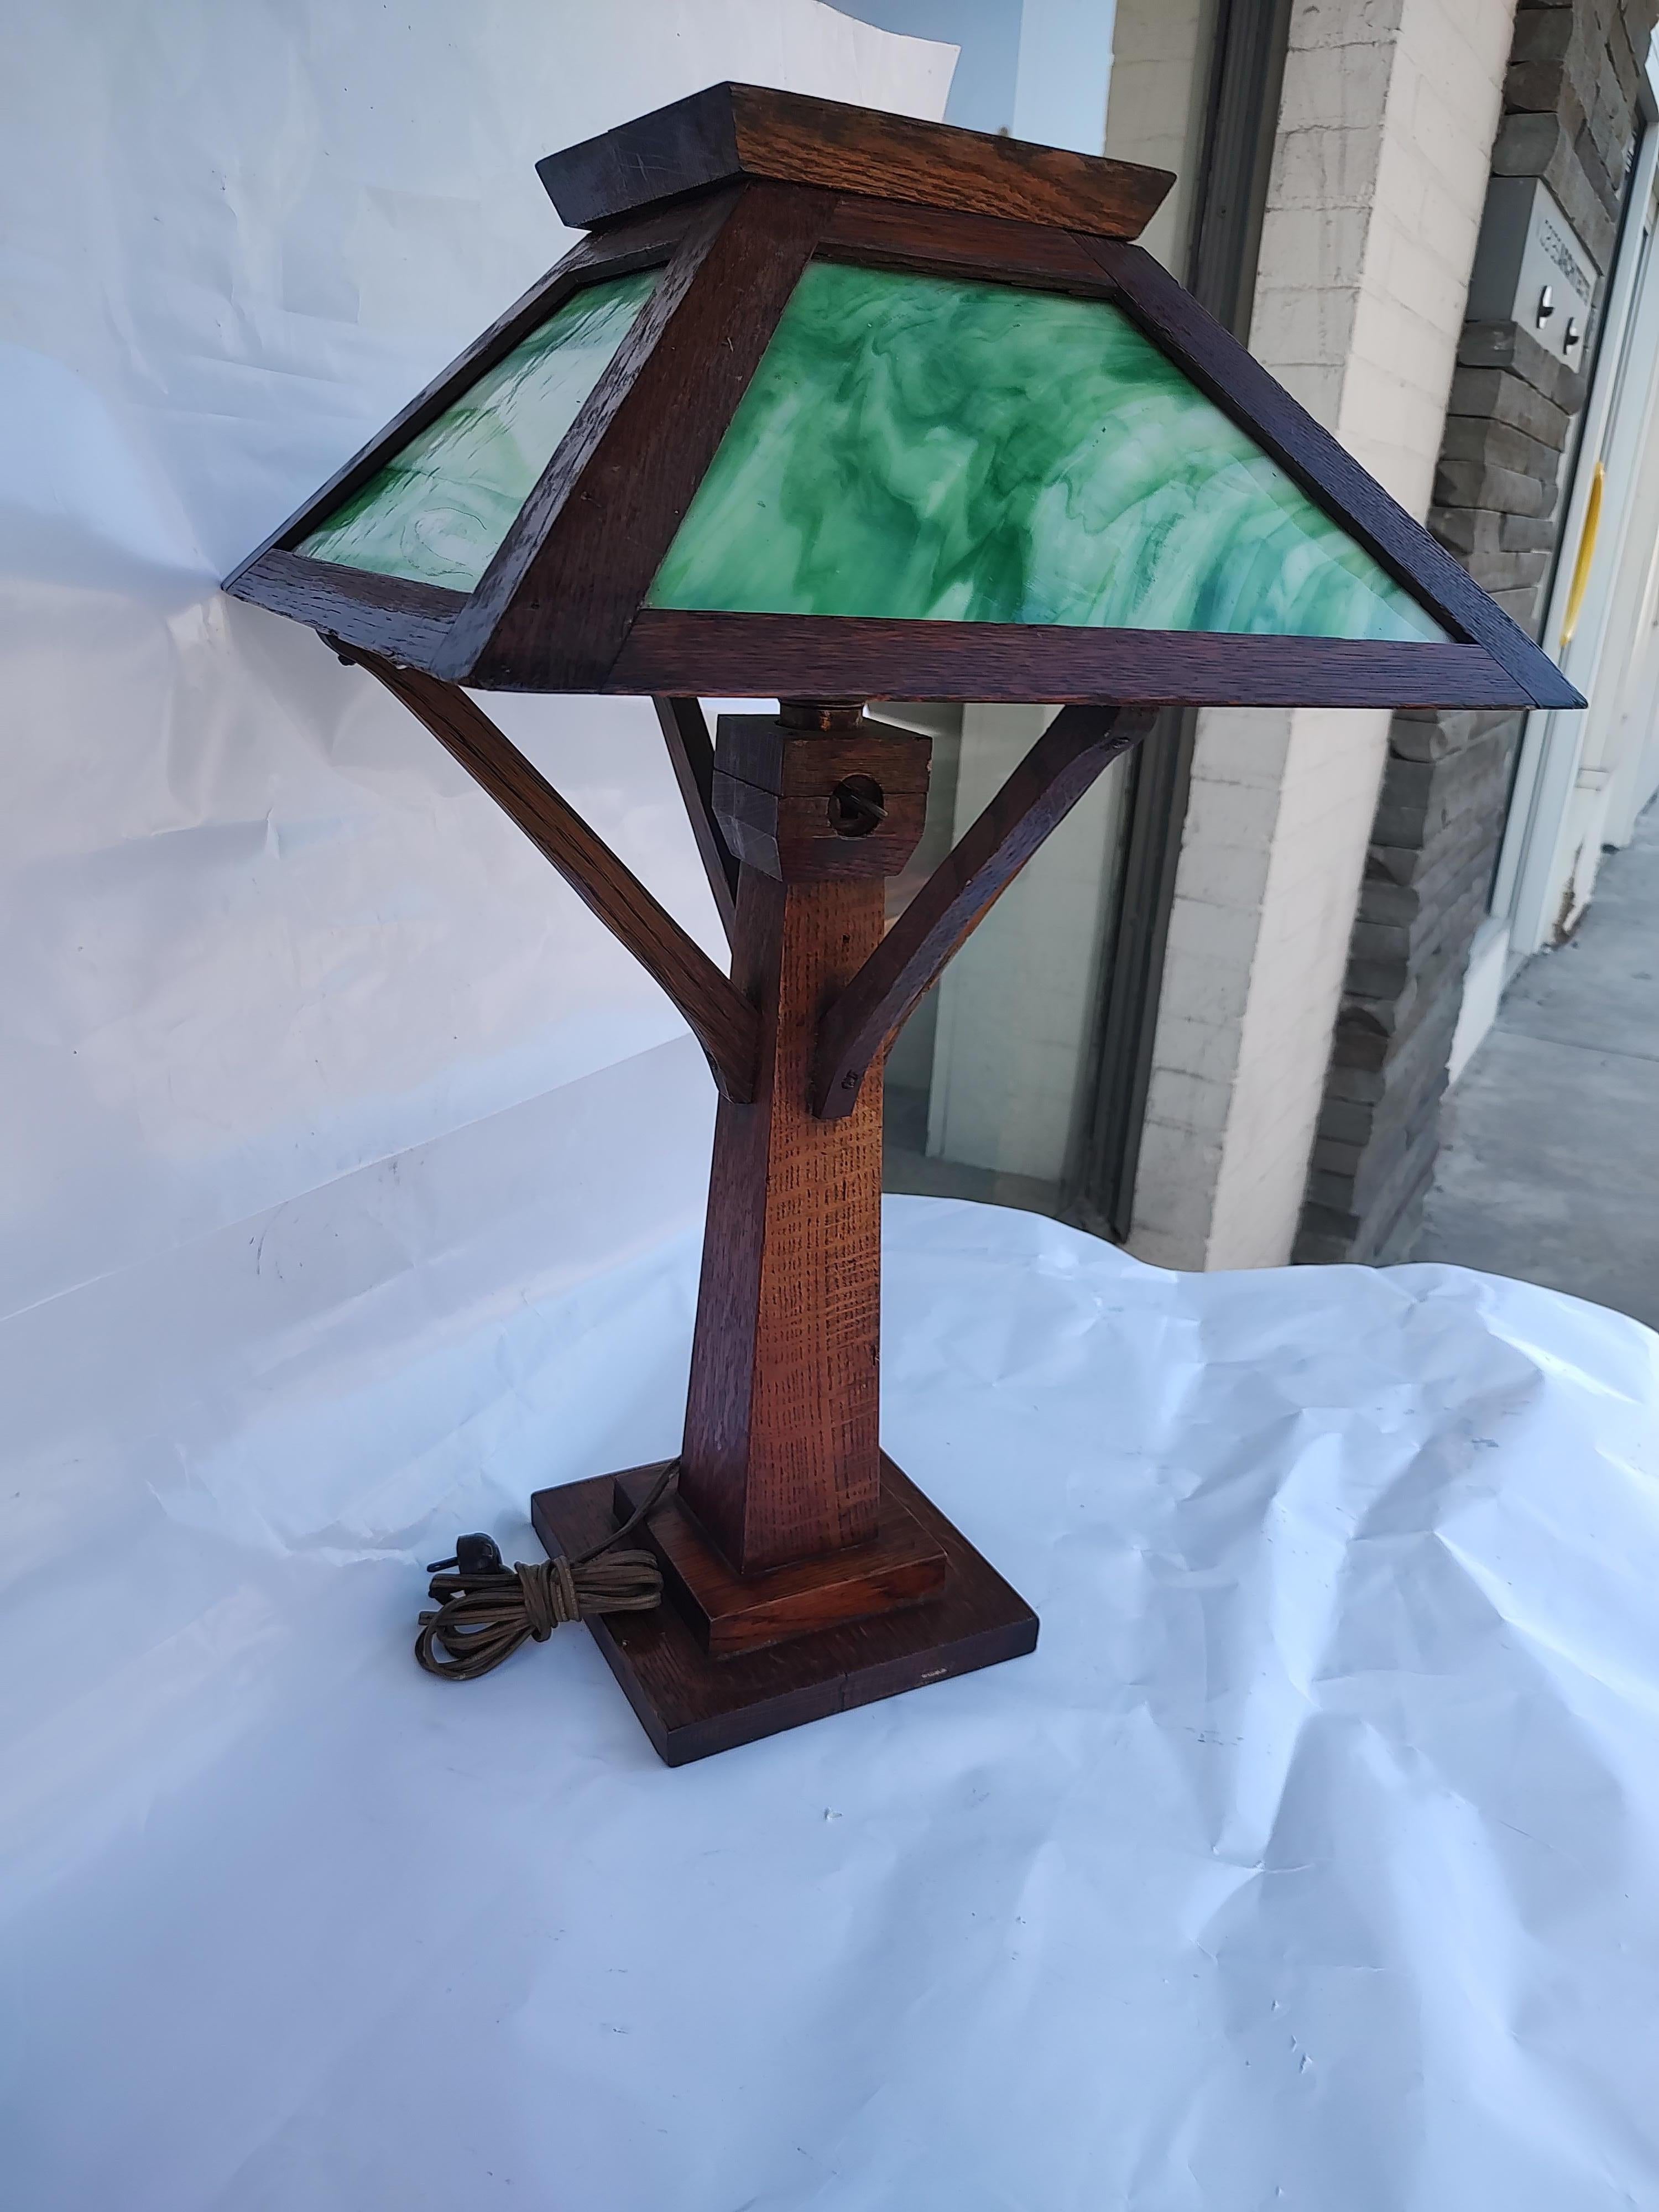 Fabulous Mission Oak Arts & Crafts table lamp with green/white slag glass panels. Quarter sawn oak and hand crafted. Tapered base with 4 supporting arms that hold the shade in place. In excellent vintage condition with minimal wear. This item can be